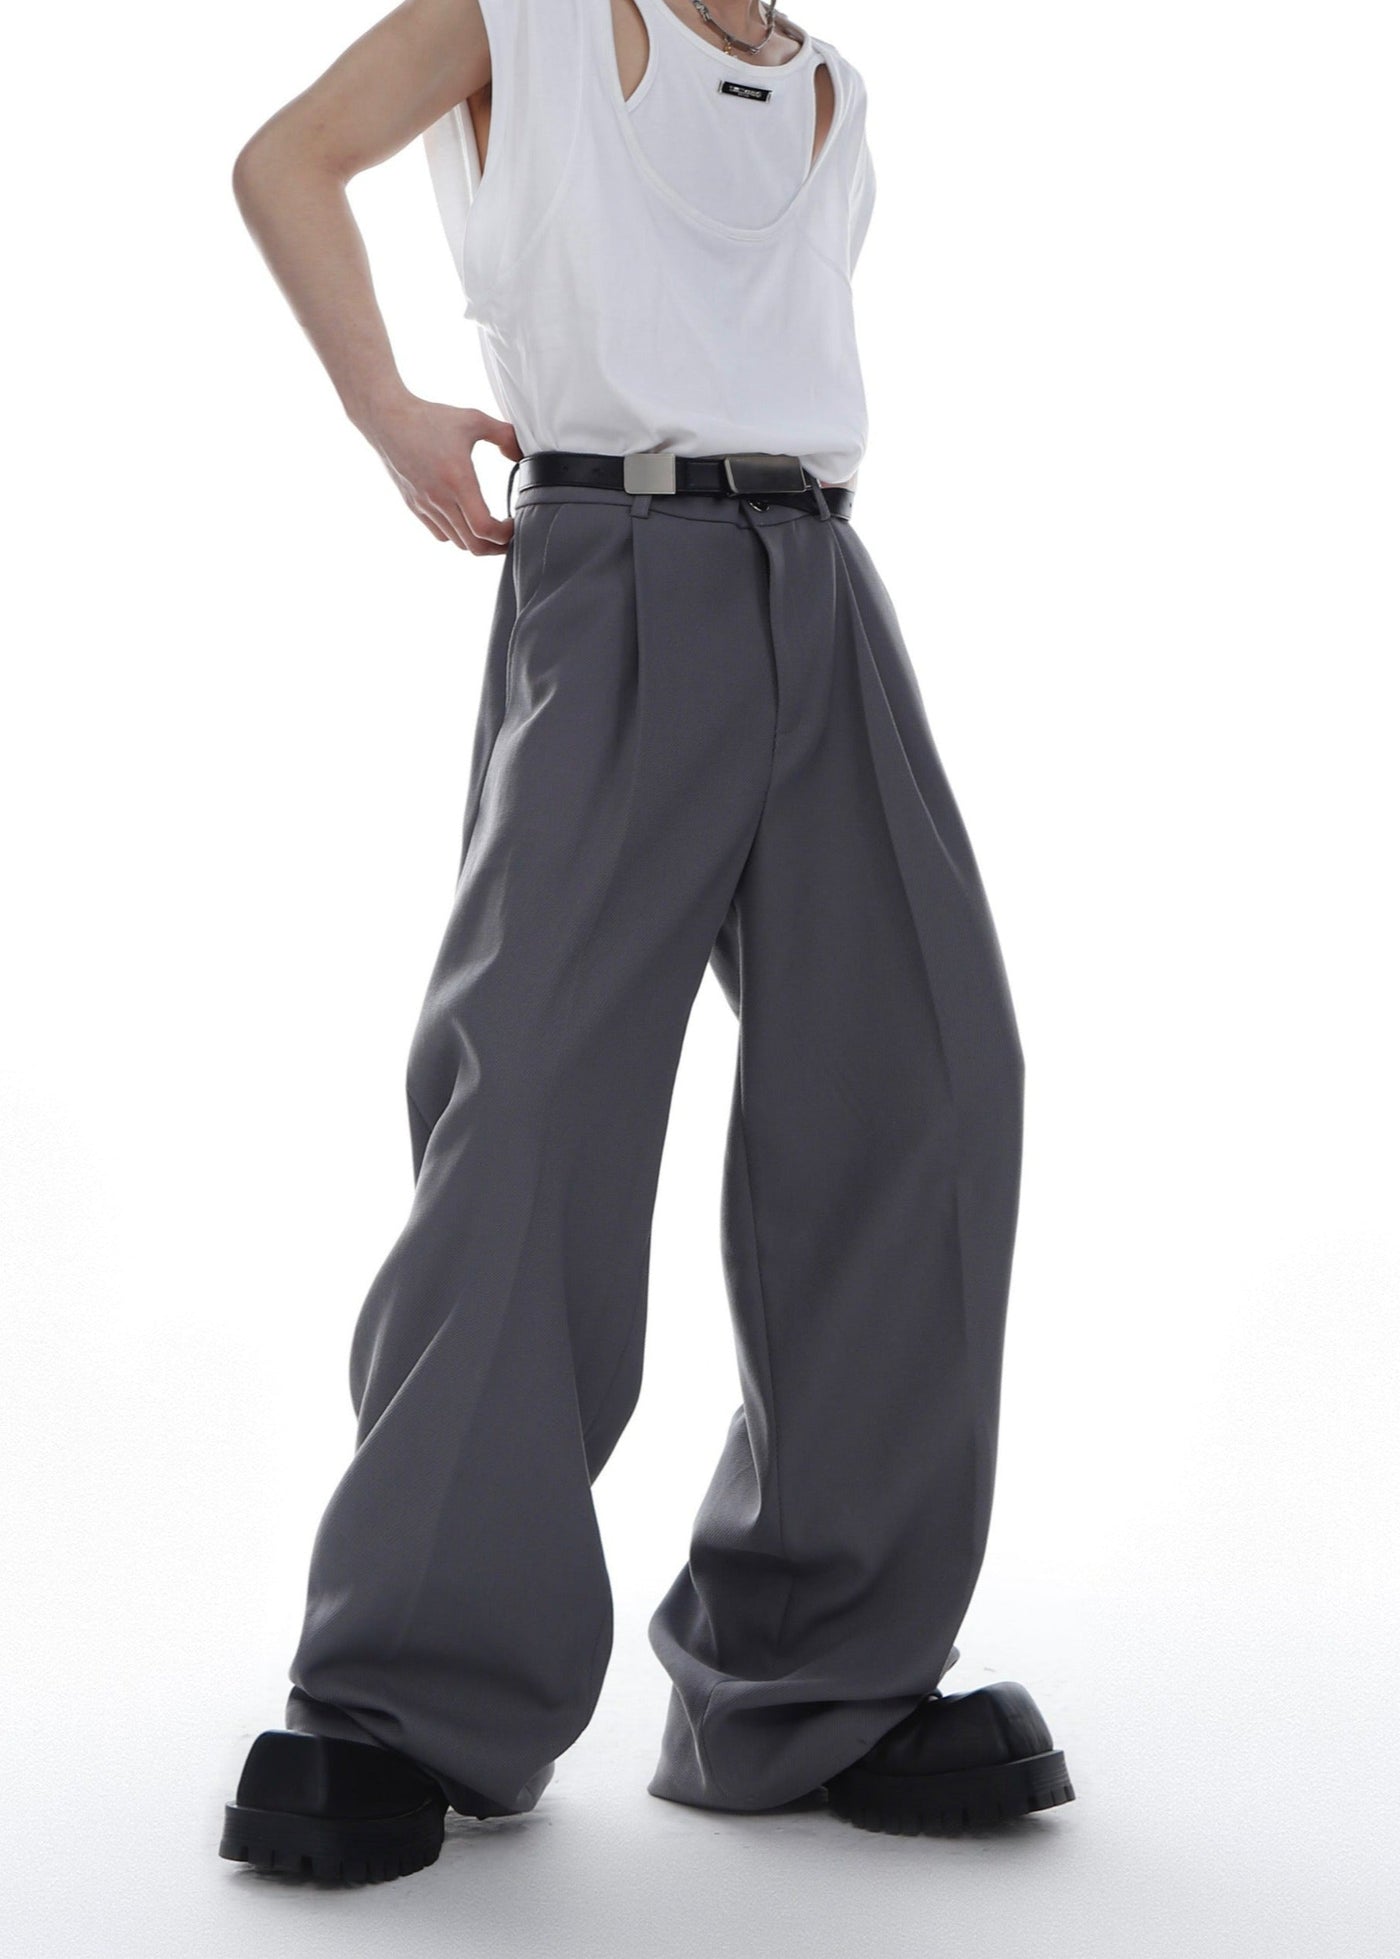 Fold Pleated Trousers Korean Street Fashion Pants By Argue Culture Shop Online at OH Vault